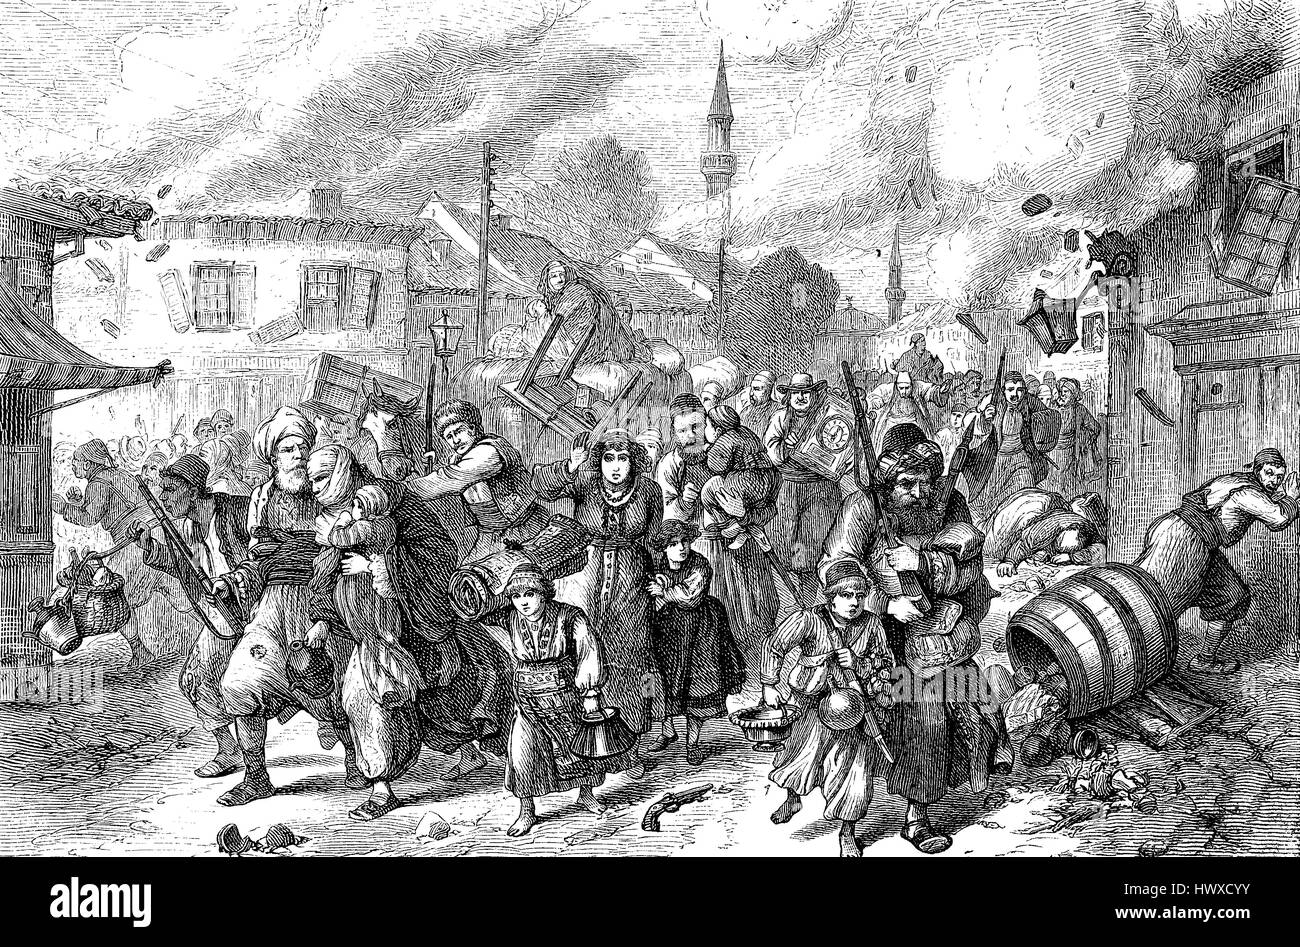 Escape of the inhabitants during a bombardment of Ruse, also transliterated as Rousse, Russe or Rustchuk, Bulgaria, military officers revolted in Ruse, 1886, reproduction of an image, woodcut from the year 1881, digital improved Stock Photo